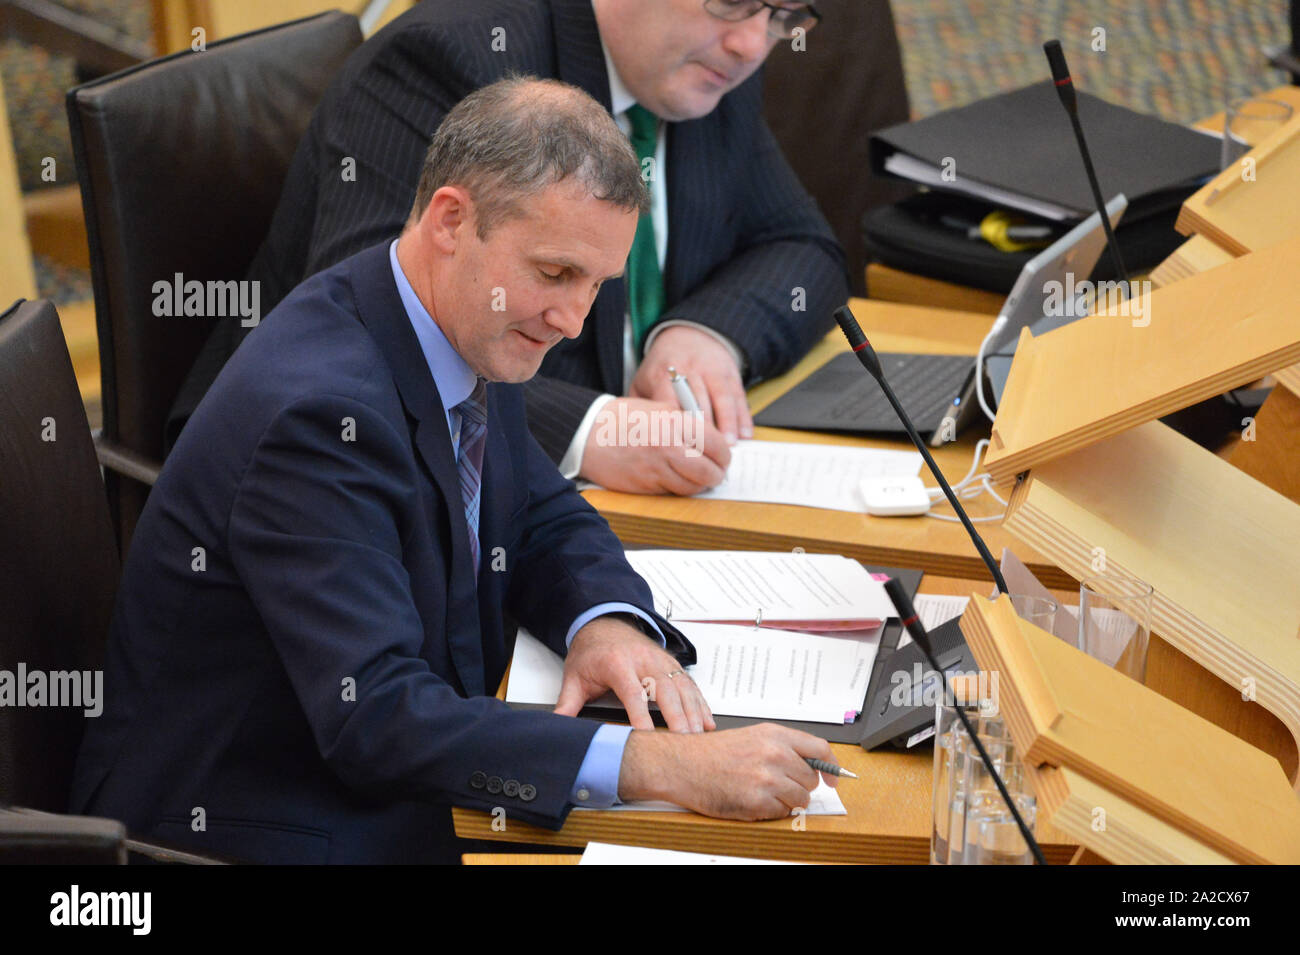 Edinburgh, 2 October 2019. Pictured: Michael Matheson MSP - Cabinet Secretary for Transport, Infrastructure and Connectivity for the Scottish National Party (SNP). Afternoon debate in the chamber: Don't Extend the ScotRail Franchise.  Scottish Labour are wanting to replace the Dutch owned firm Abellio and nationalise ScotRail after its many failings from over crowding to cancelled trains.  Credit: Colin Fisher/Alamy Live News Stock Photo